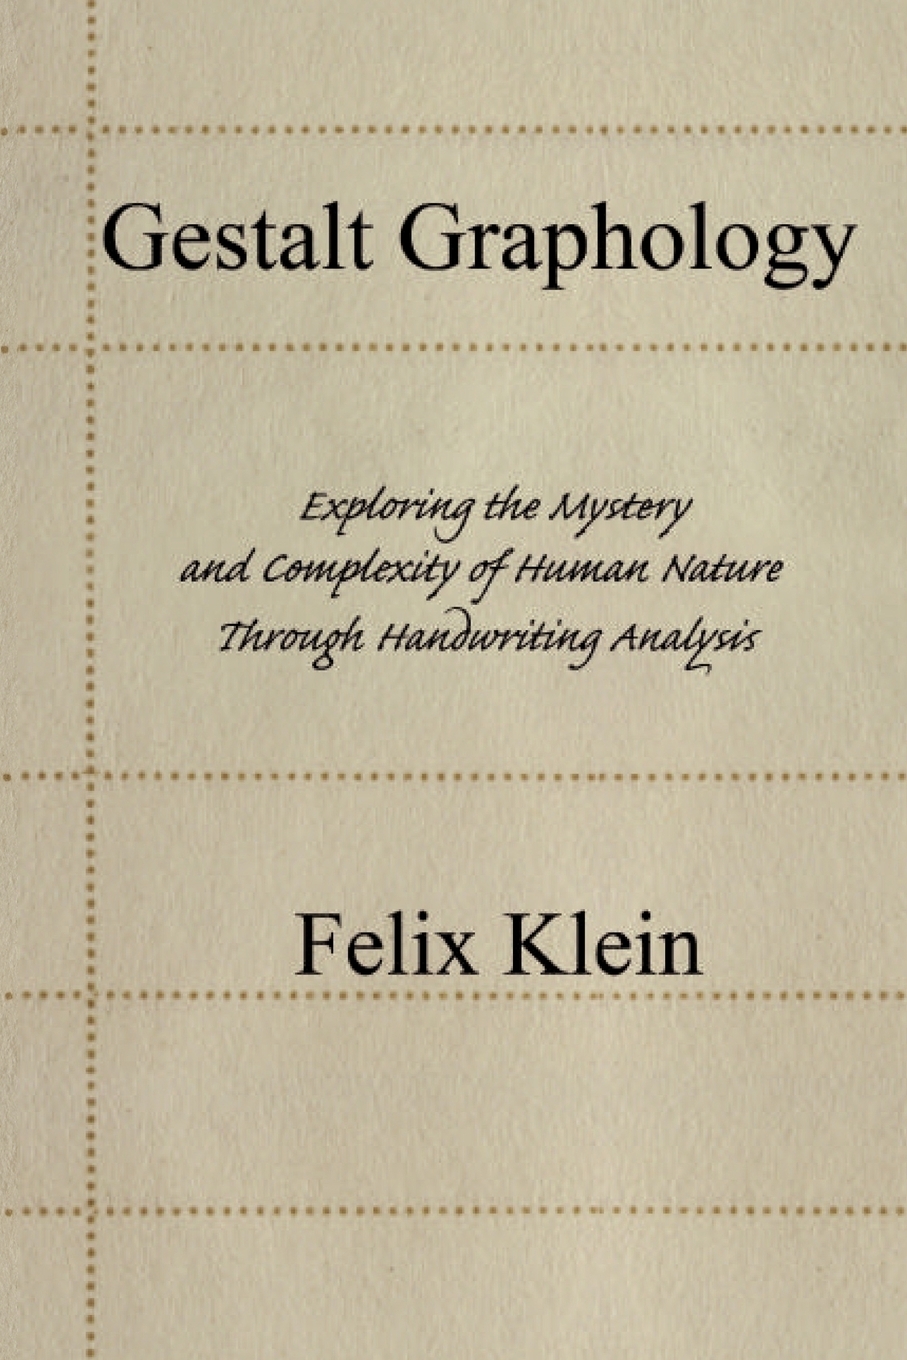 Gestalt Graphology. Exploring the Mystery and Complexity of Human Nature Through Handwriting Analysis